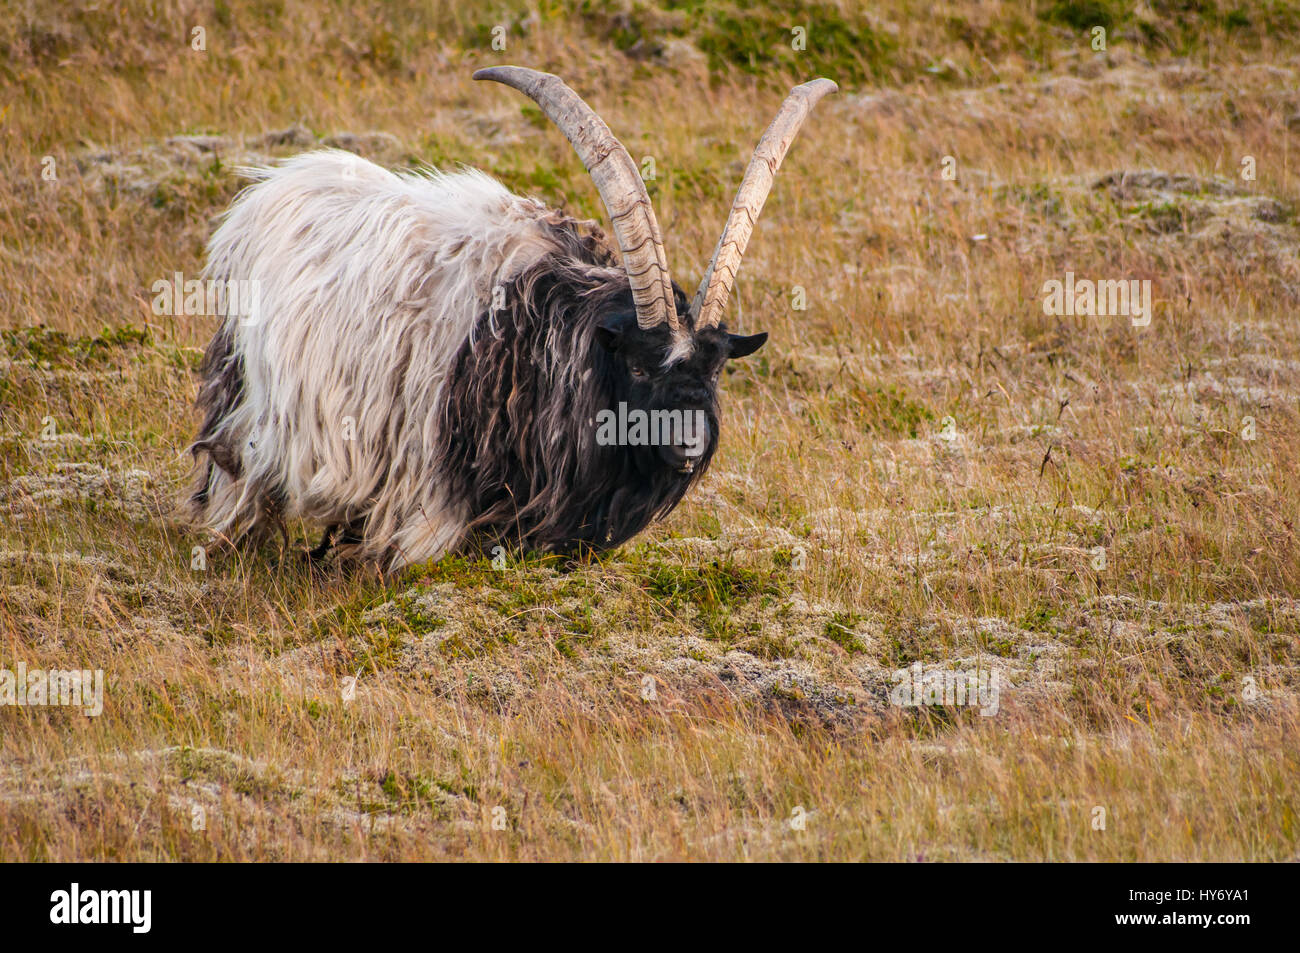 Male of Icelandic goat with big horns, an ancient breed of domestic goat and the only farm animal sponsored by the Icelandic government for the purpos Stock Photo